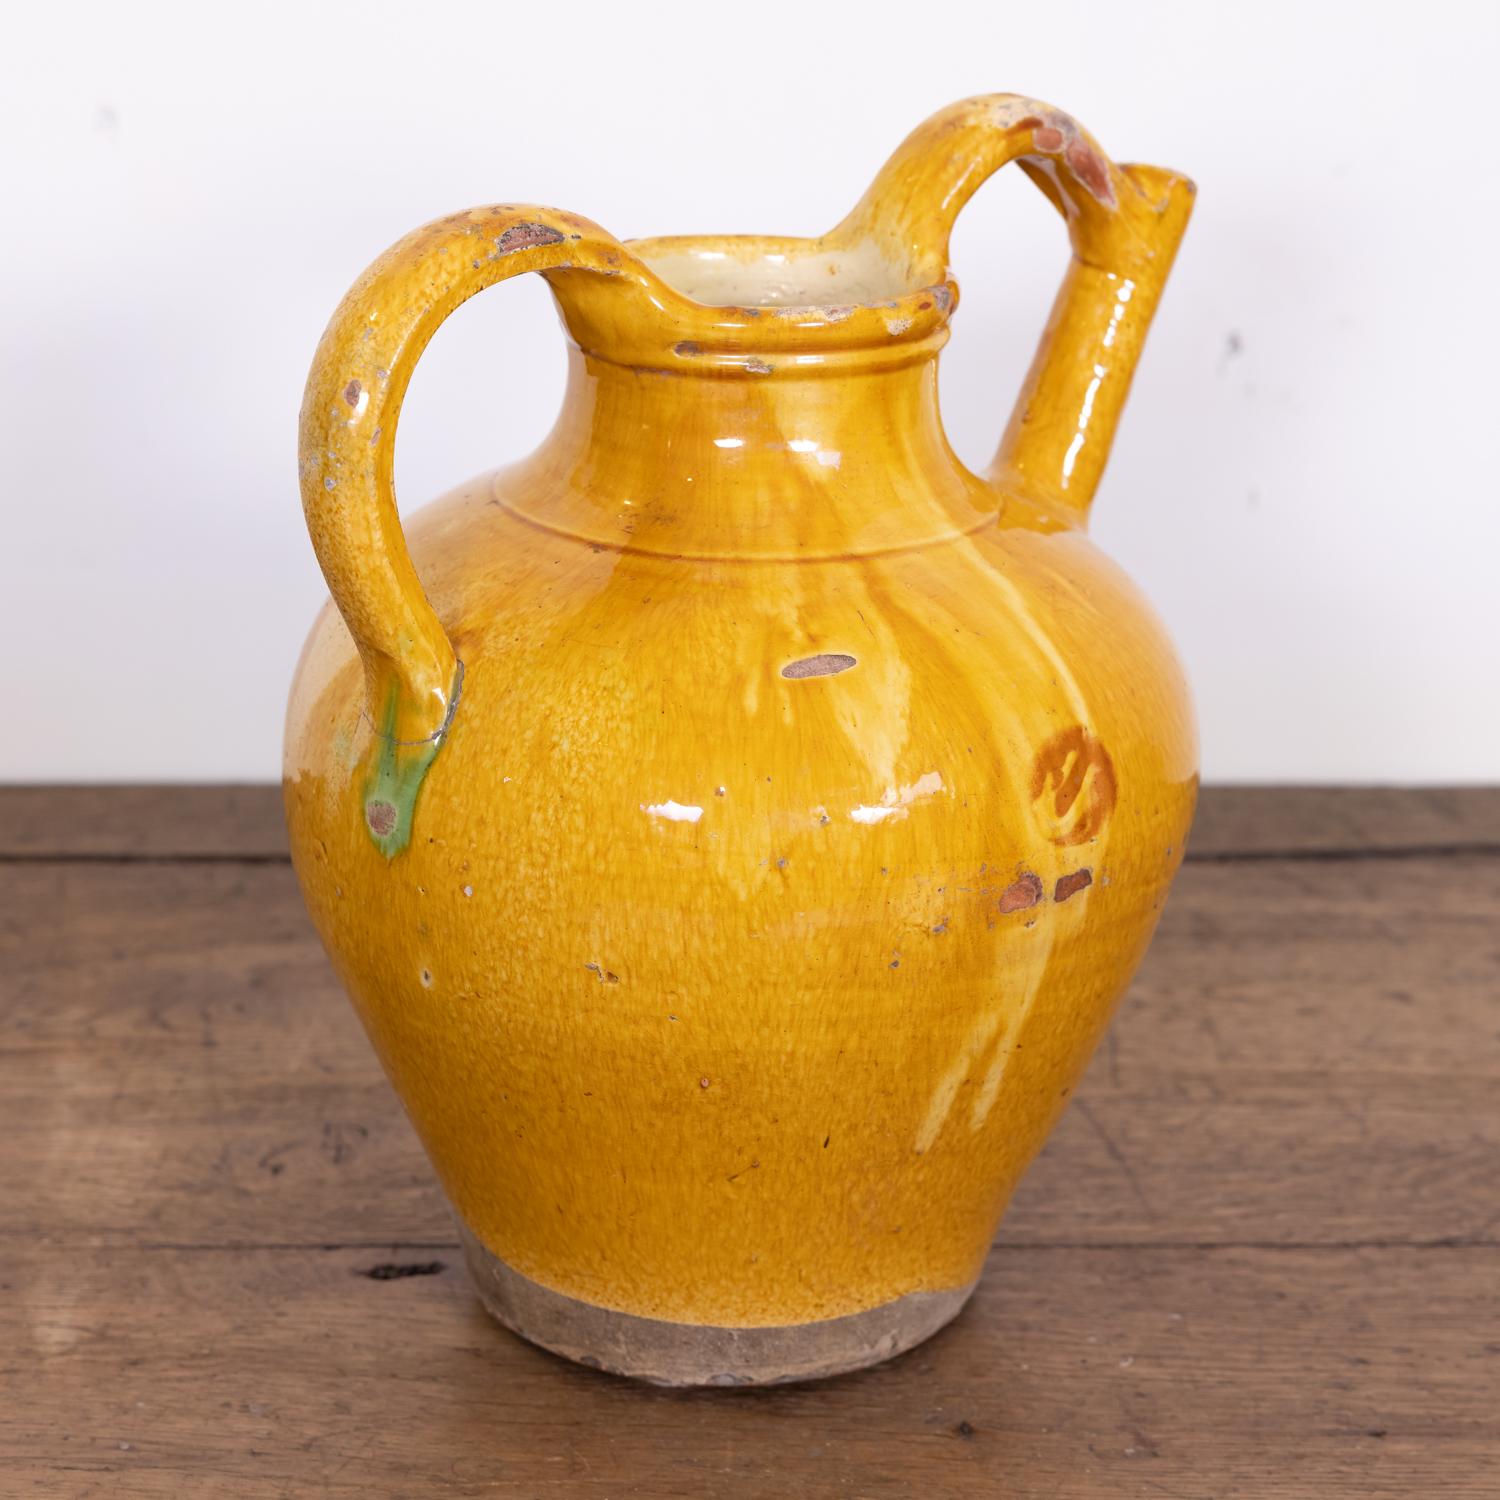 A large 19th century French water jug or cruche orjol from the Languedoc region in southwest France, having a mustard yellow glaze with green and caramel colored drips and two beautifully arched handles that rise above the opening with the spout